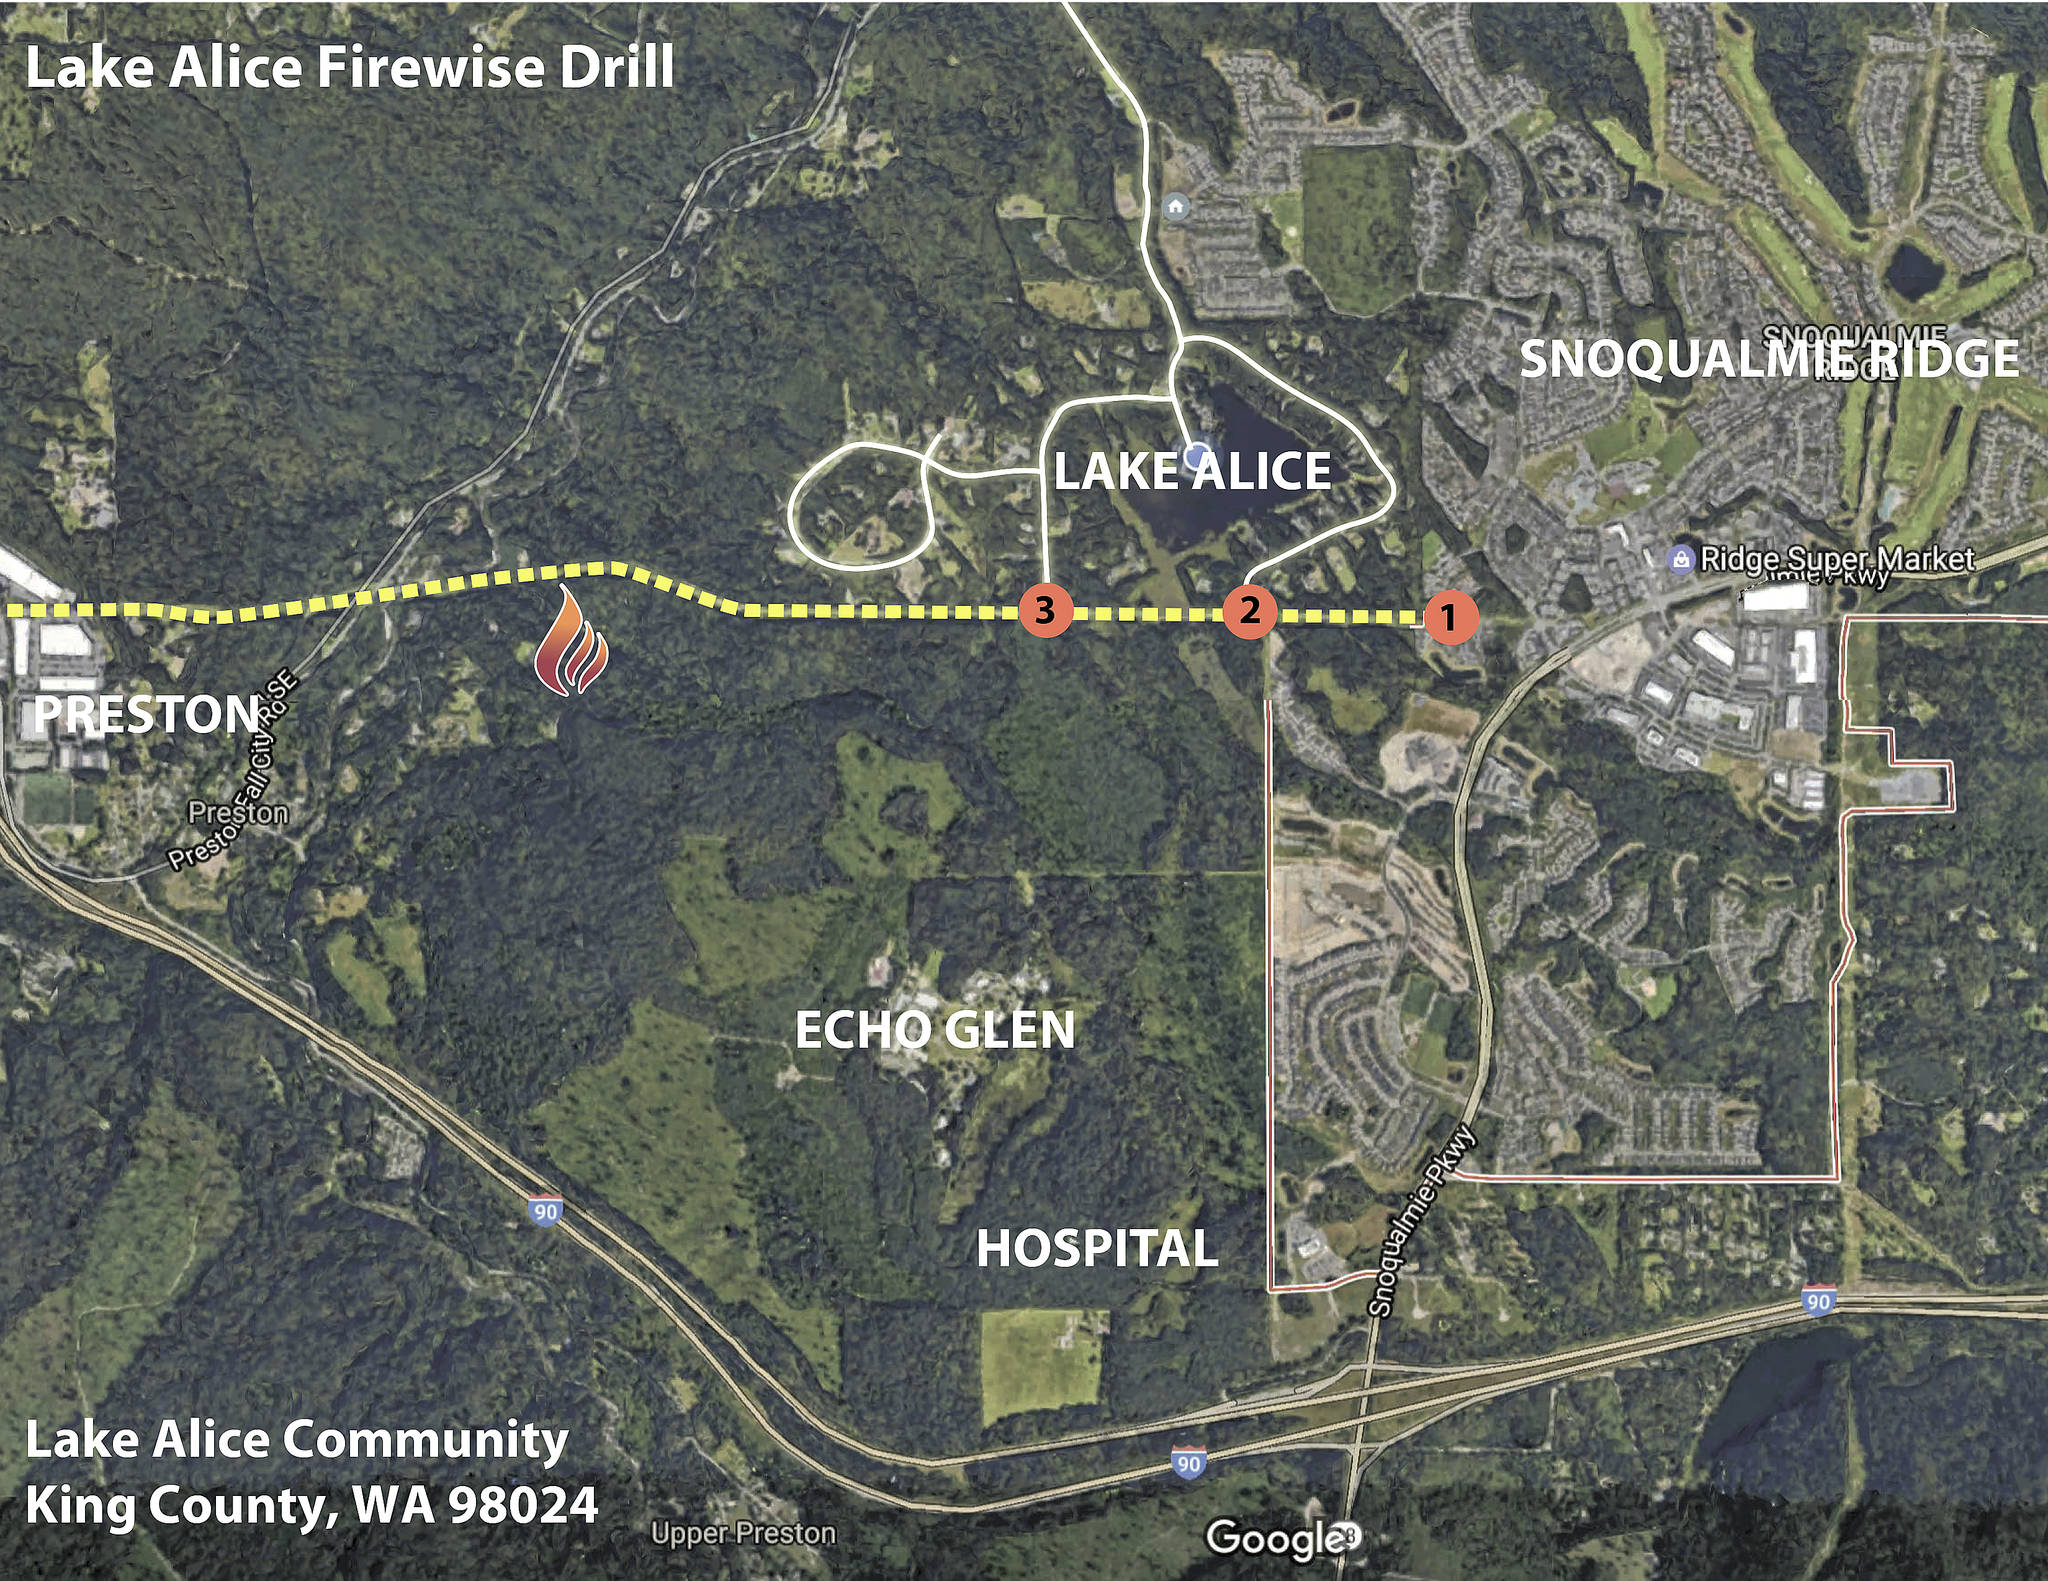 A map of the Lake Alice community’s Firewise drill showing the path of the power line access road from the Snoqualmie Ridge through to Preston. (Courtesy Photo)